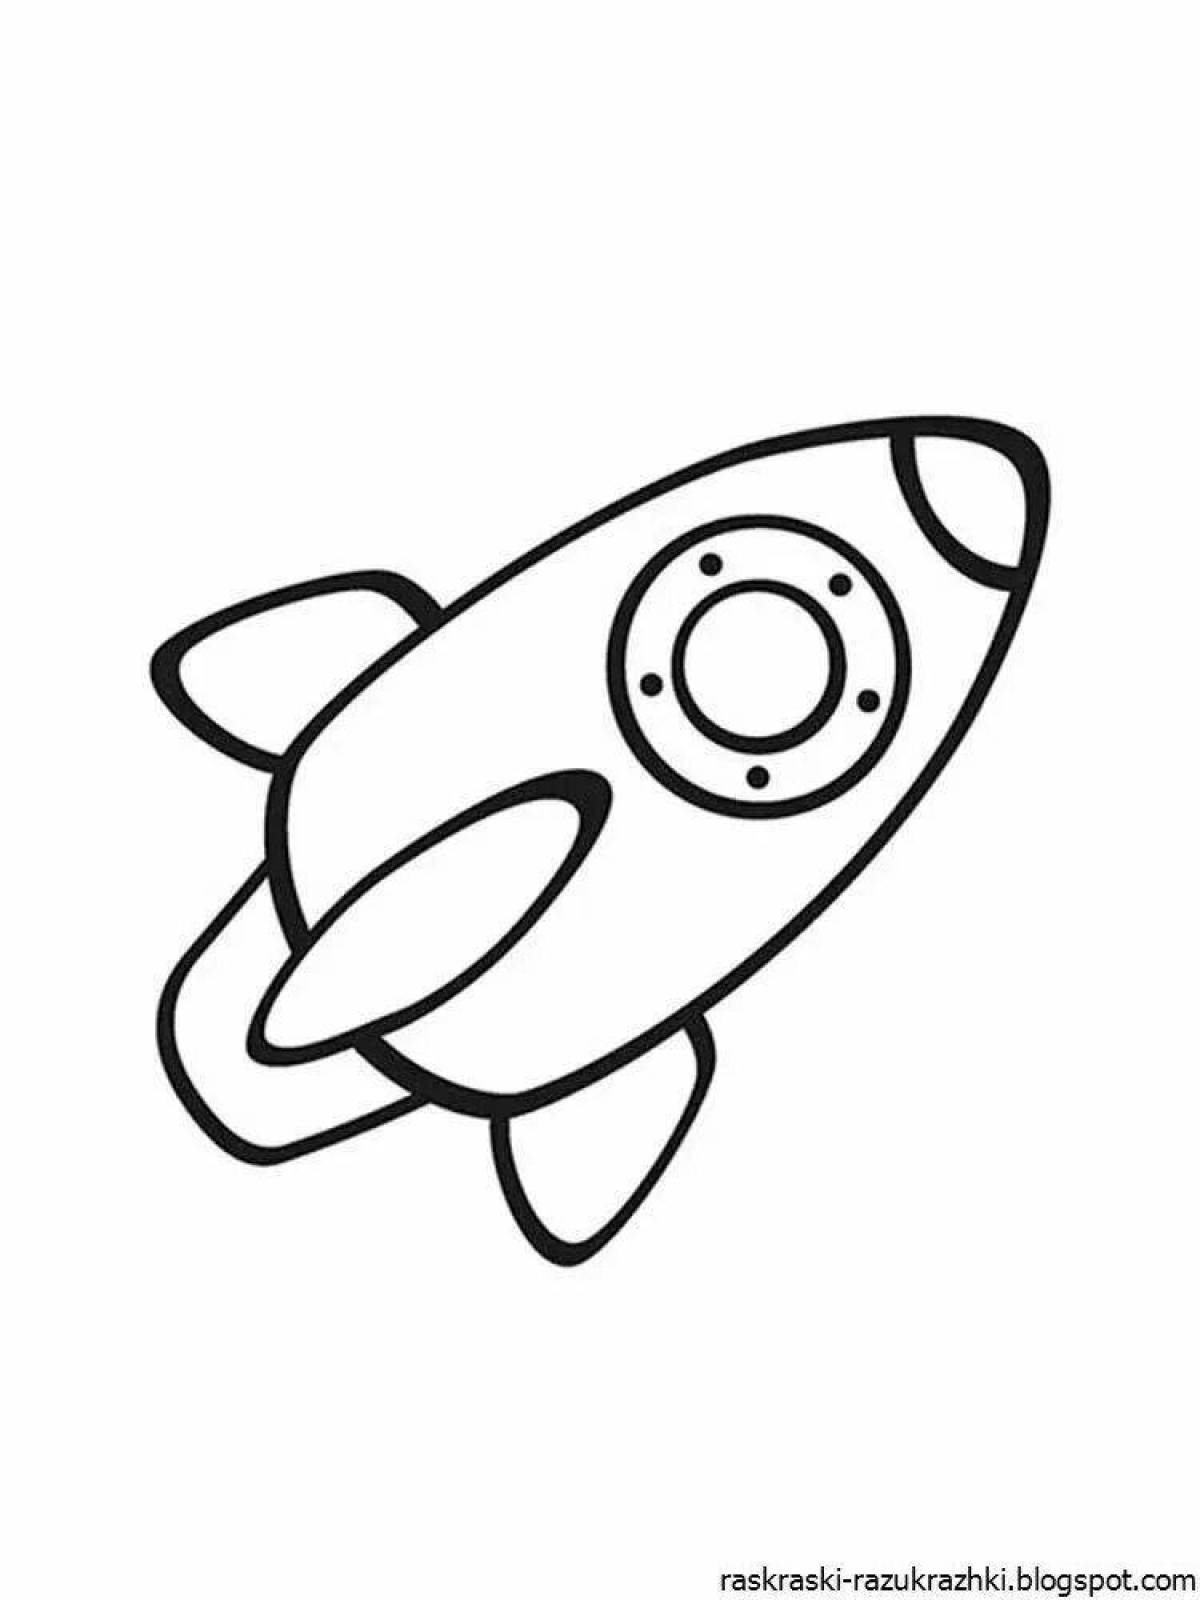 Playful rocket coloring page for kids